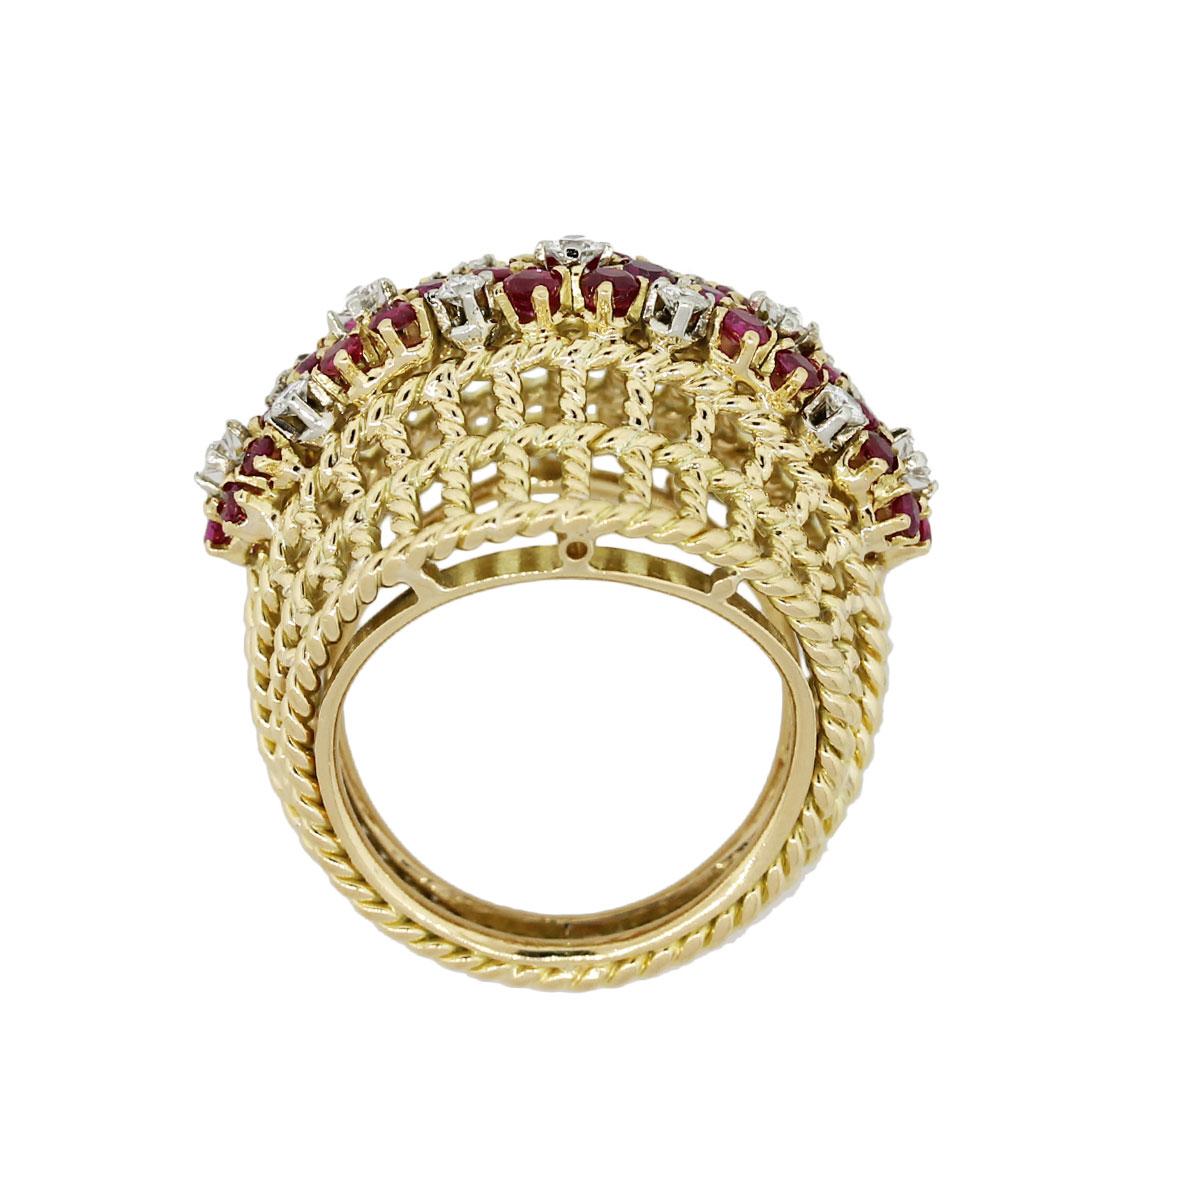 Material: 18k yellow gold
Diamond Details: Approximately 0.53ctw of round brilliant diamonds. Diamonds are G/H in color and VS in clarity
Gemstone Details: Approximately 0.45ctw of round shape rubies.
Ring Size: 4.75 (can be sized)
Ring